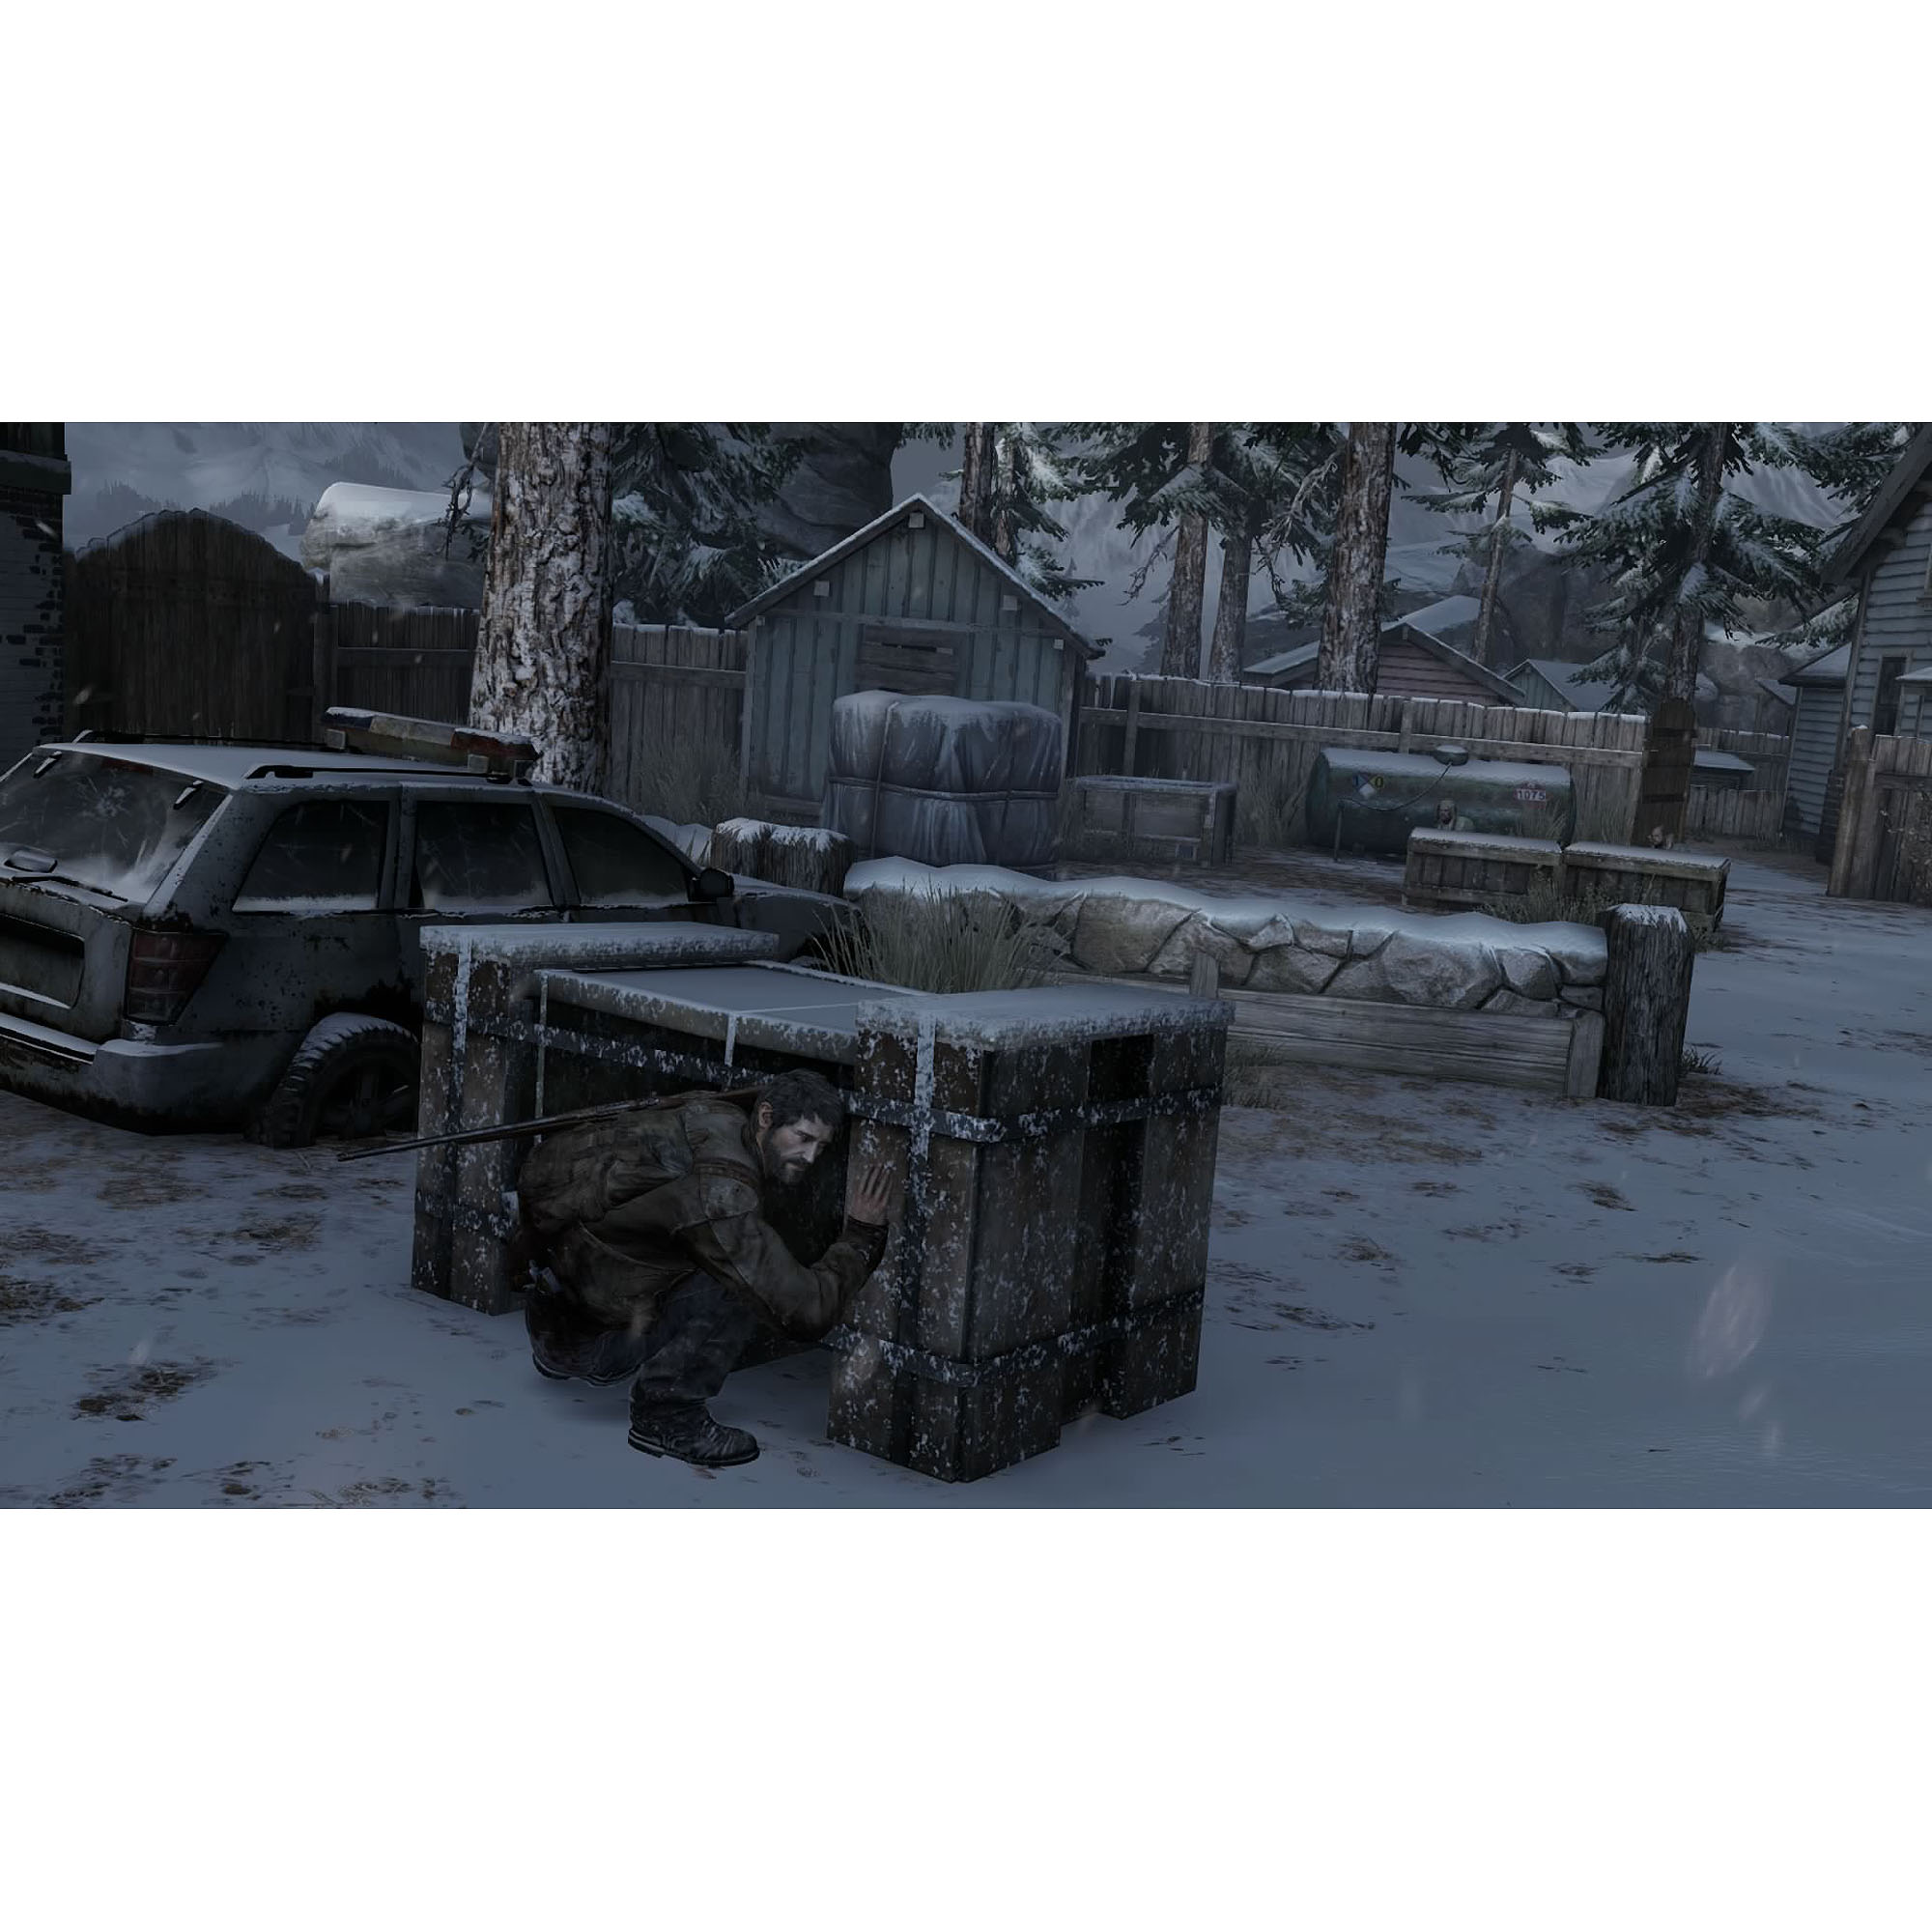 The Last of Us Remastered - PlayStation 4 - image 19 of 19